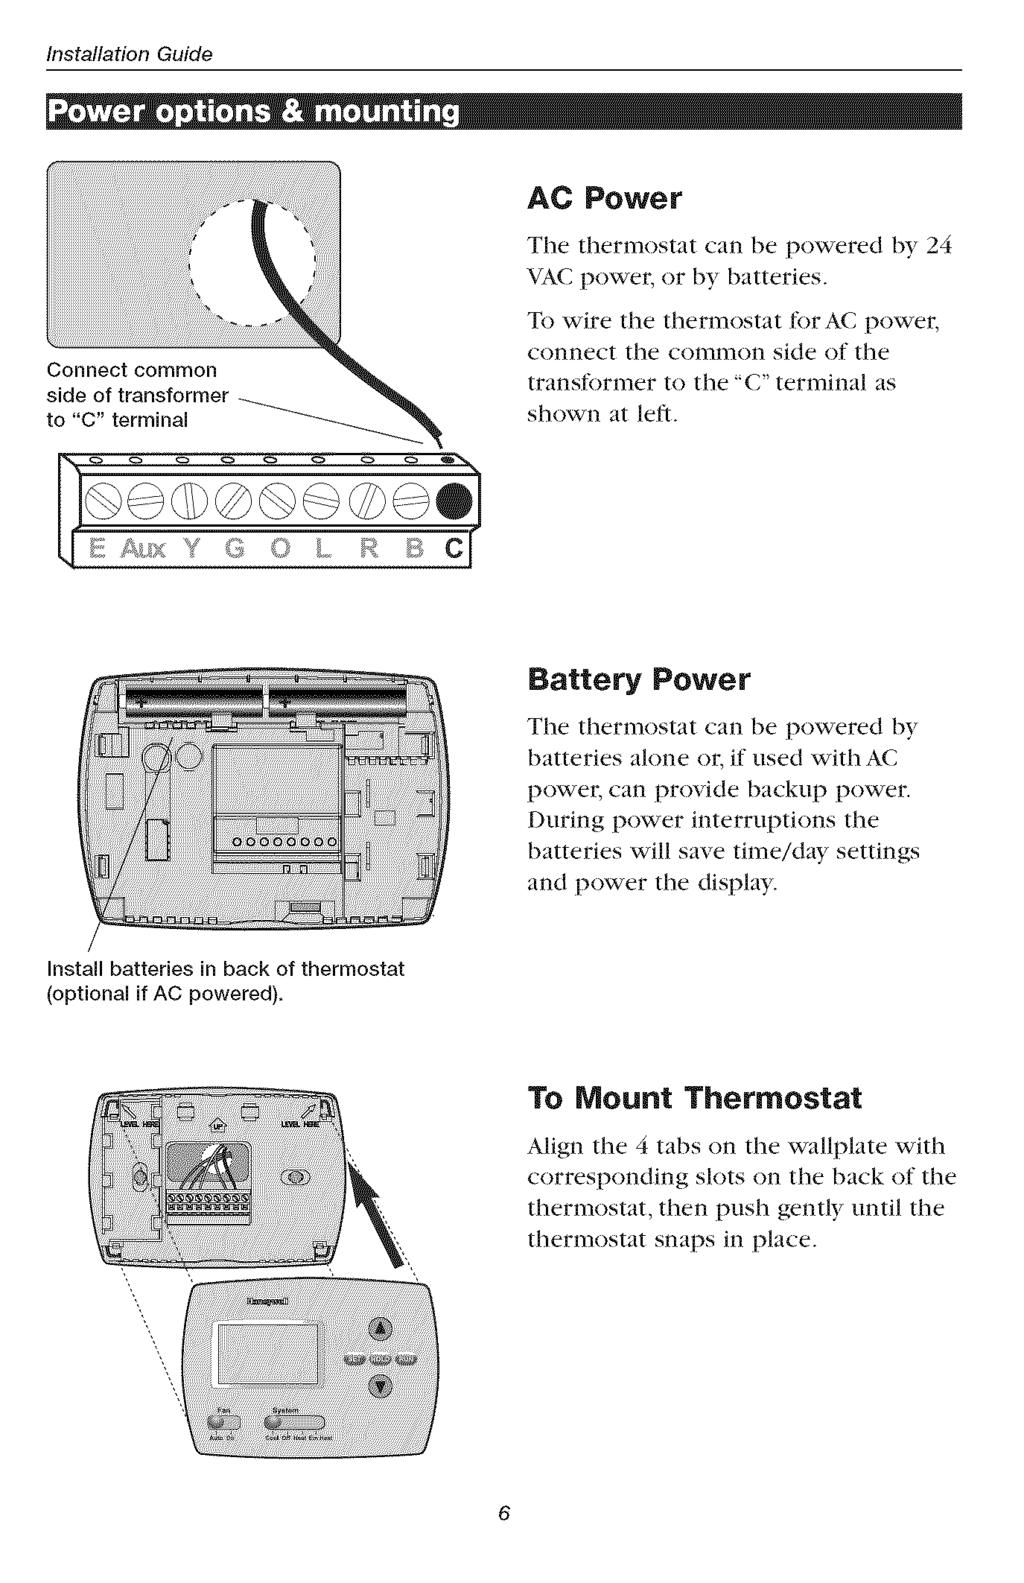 Installation Guide AC Power The thermostat can be powered by 24 VAC powel, or by batteries.